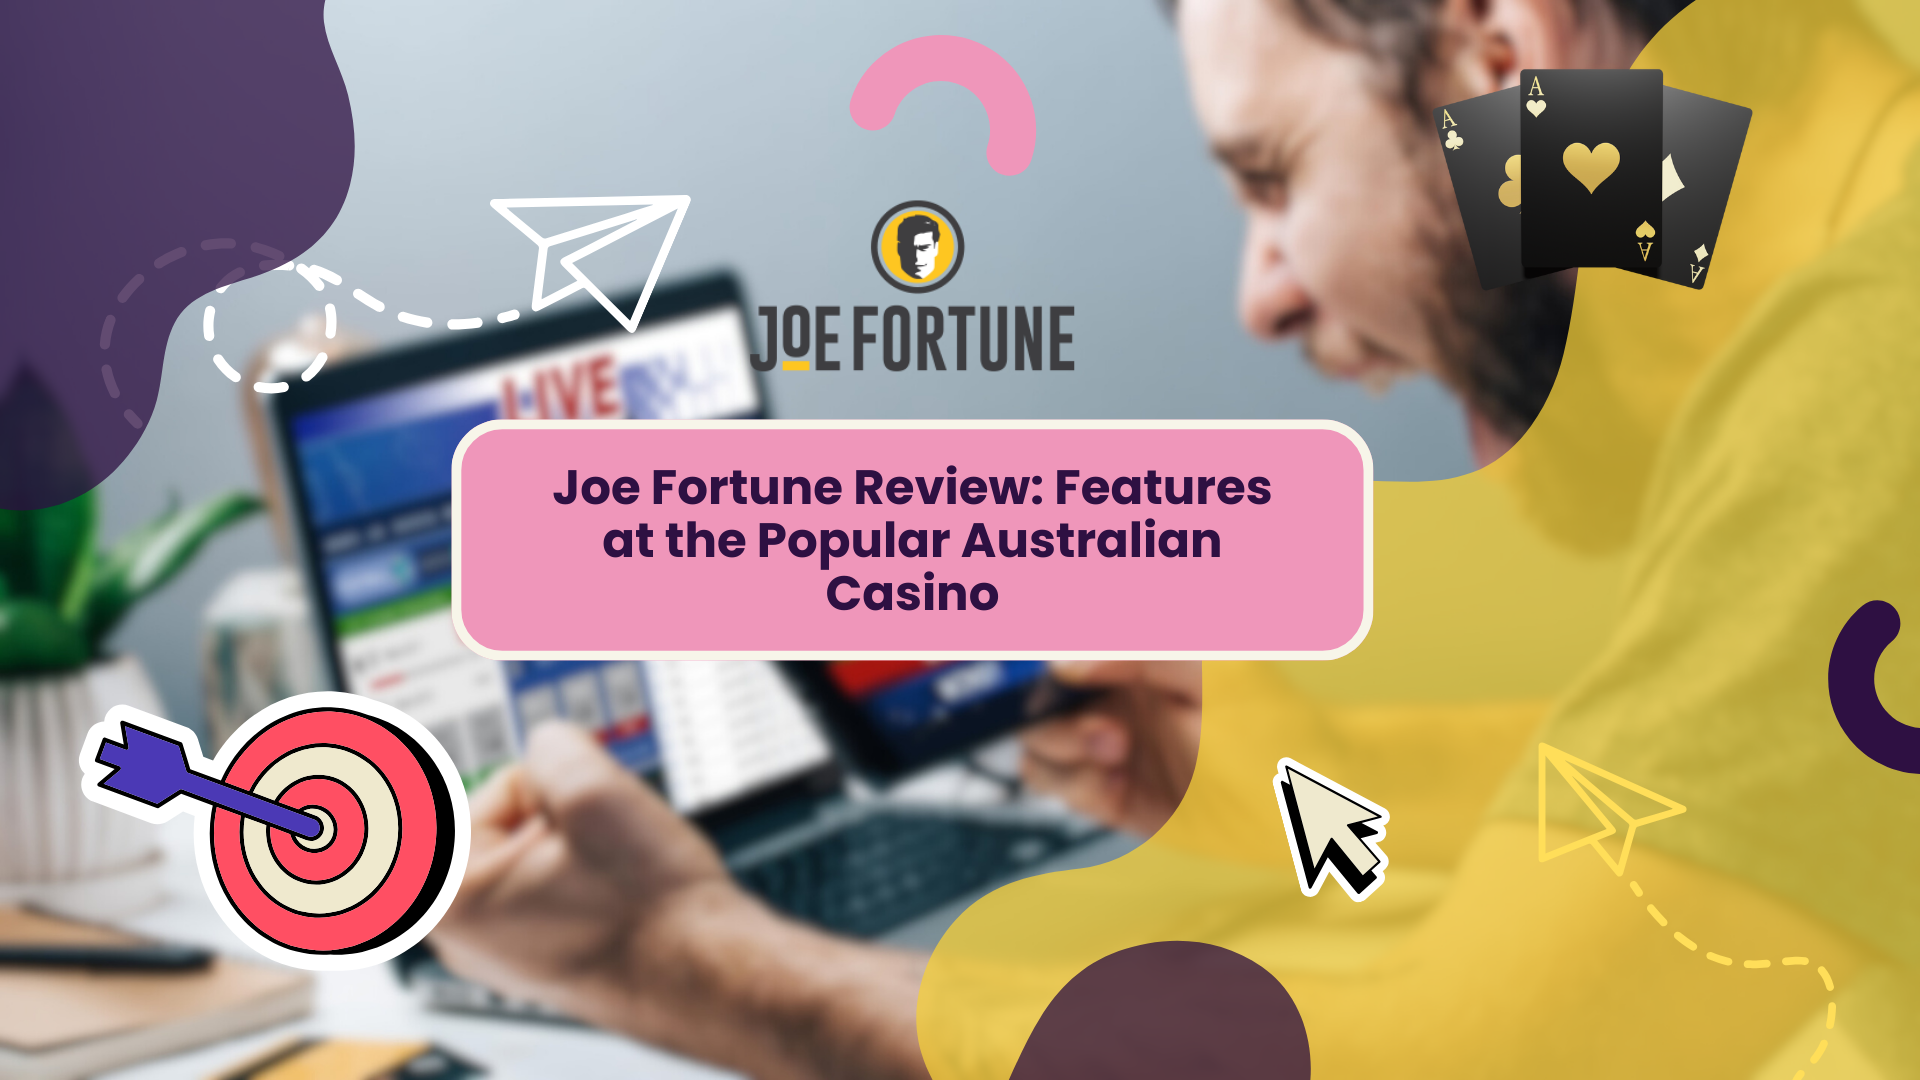 Joe Fortune Review: Features at the Popular Australian Casino